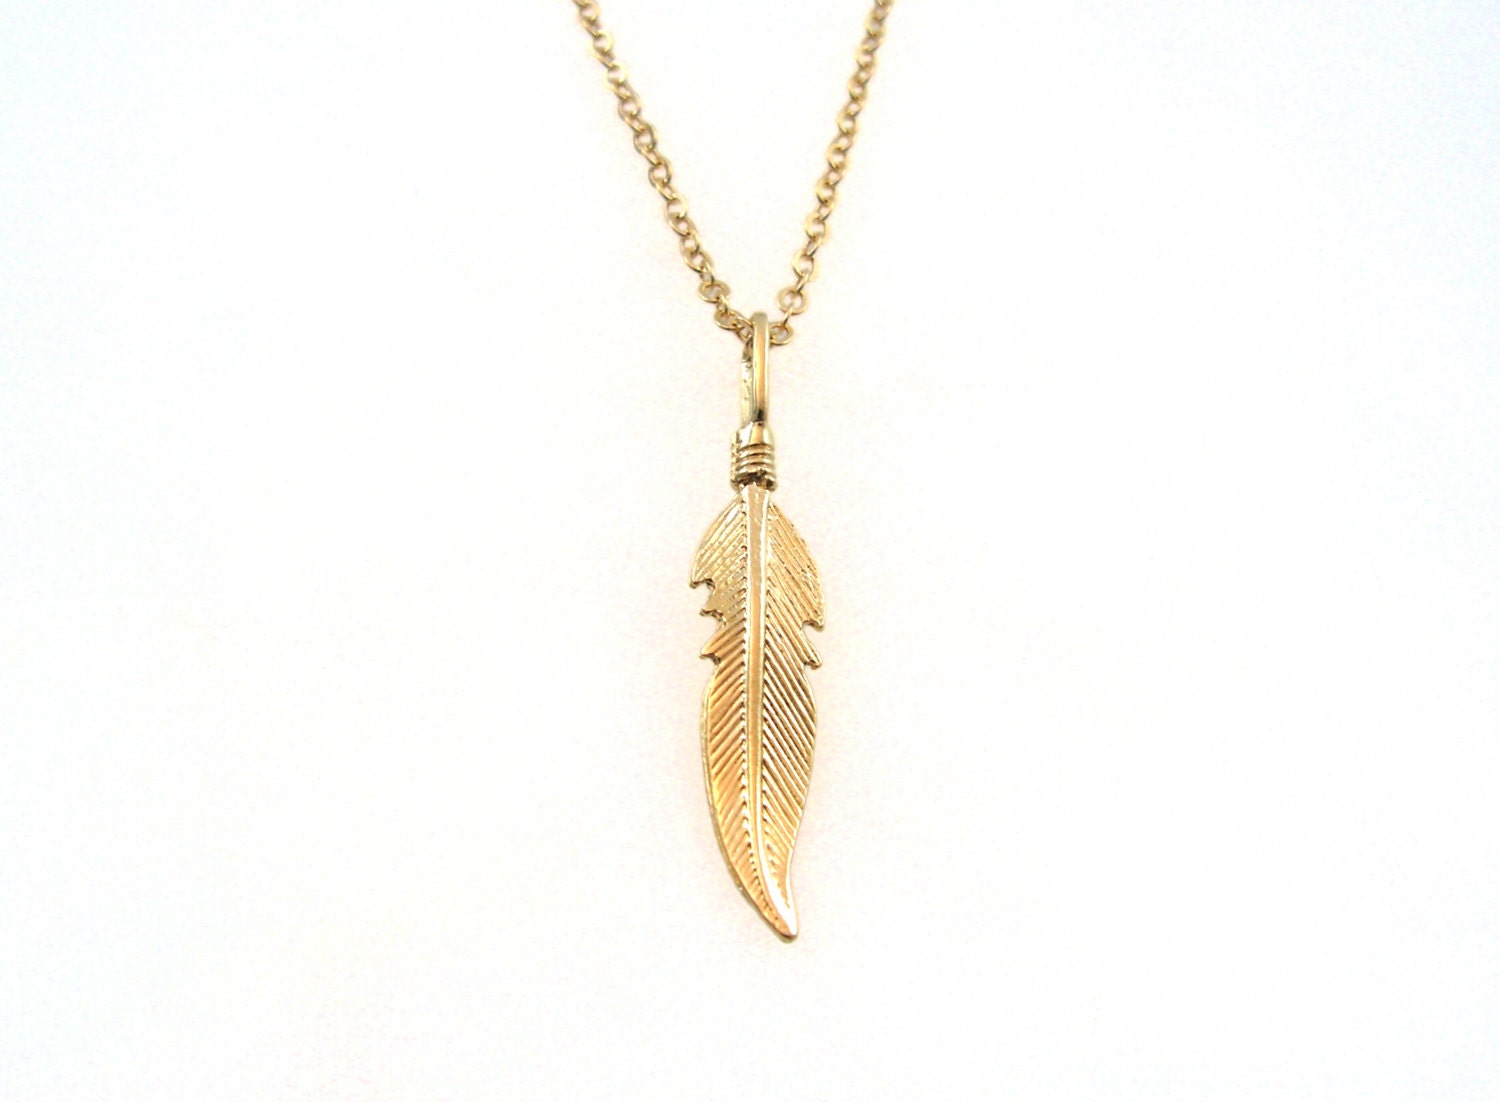 Gold feather necklace. Feather pendant necklace. Hobo